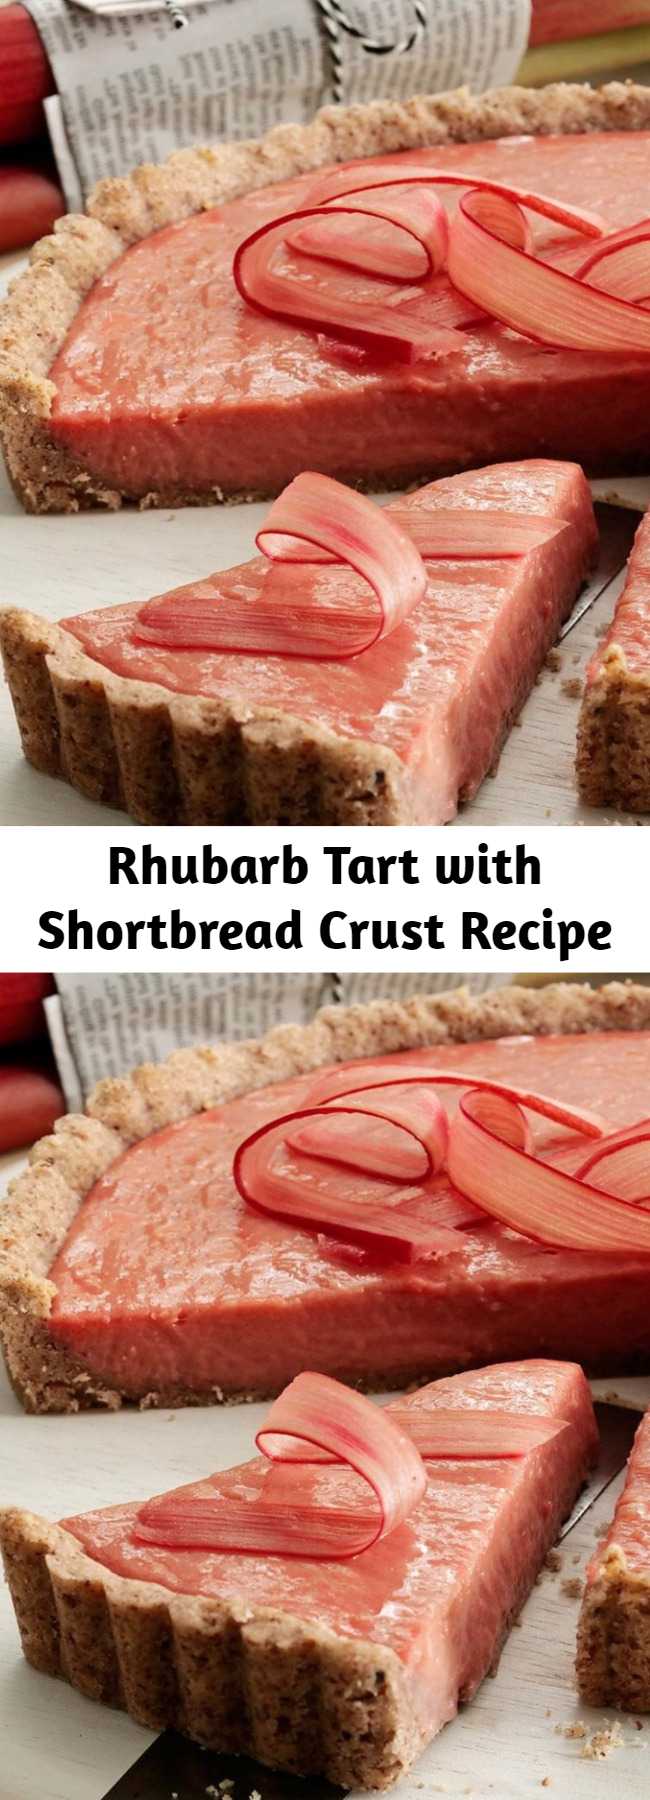 Rhubarb Tart with Shortbread Crust Recipe - Here's a perfect ending to a grilled summer meal! Between the creamy texture, the pretty color and the buttery crust, this recipe is simply delightful.